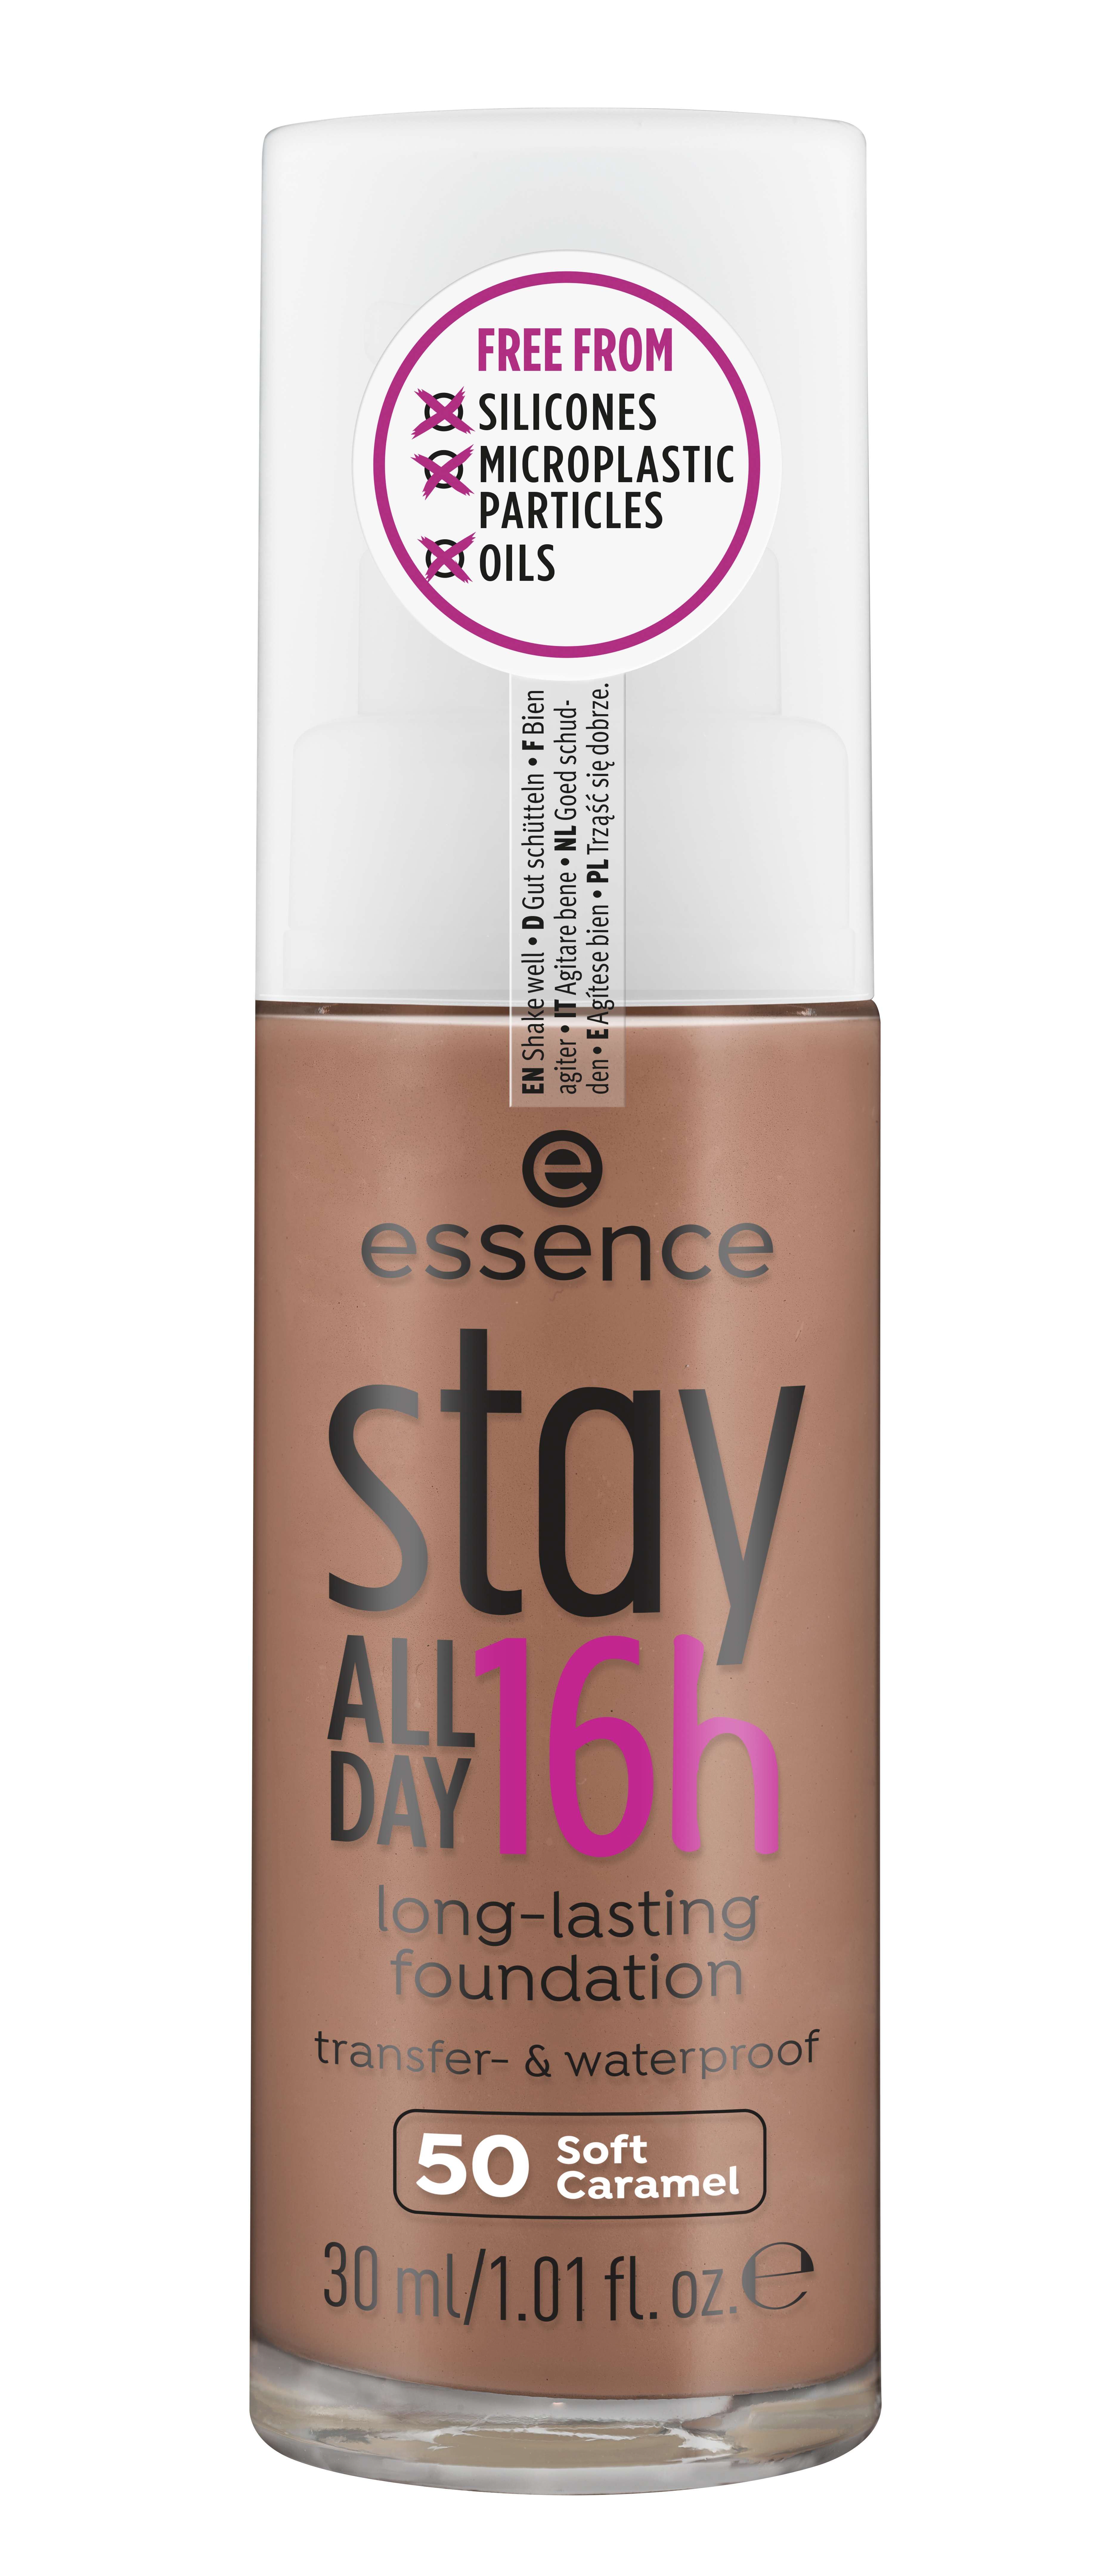 Sand day essence foundation stay 16h all 30 long-lasting Soft